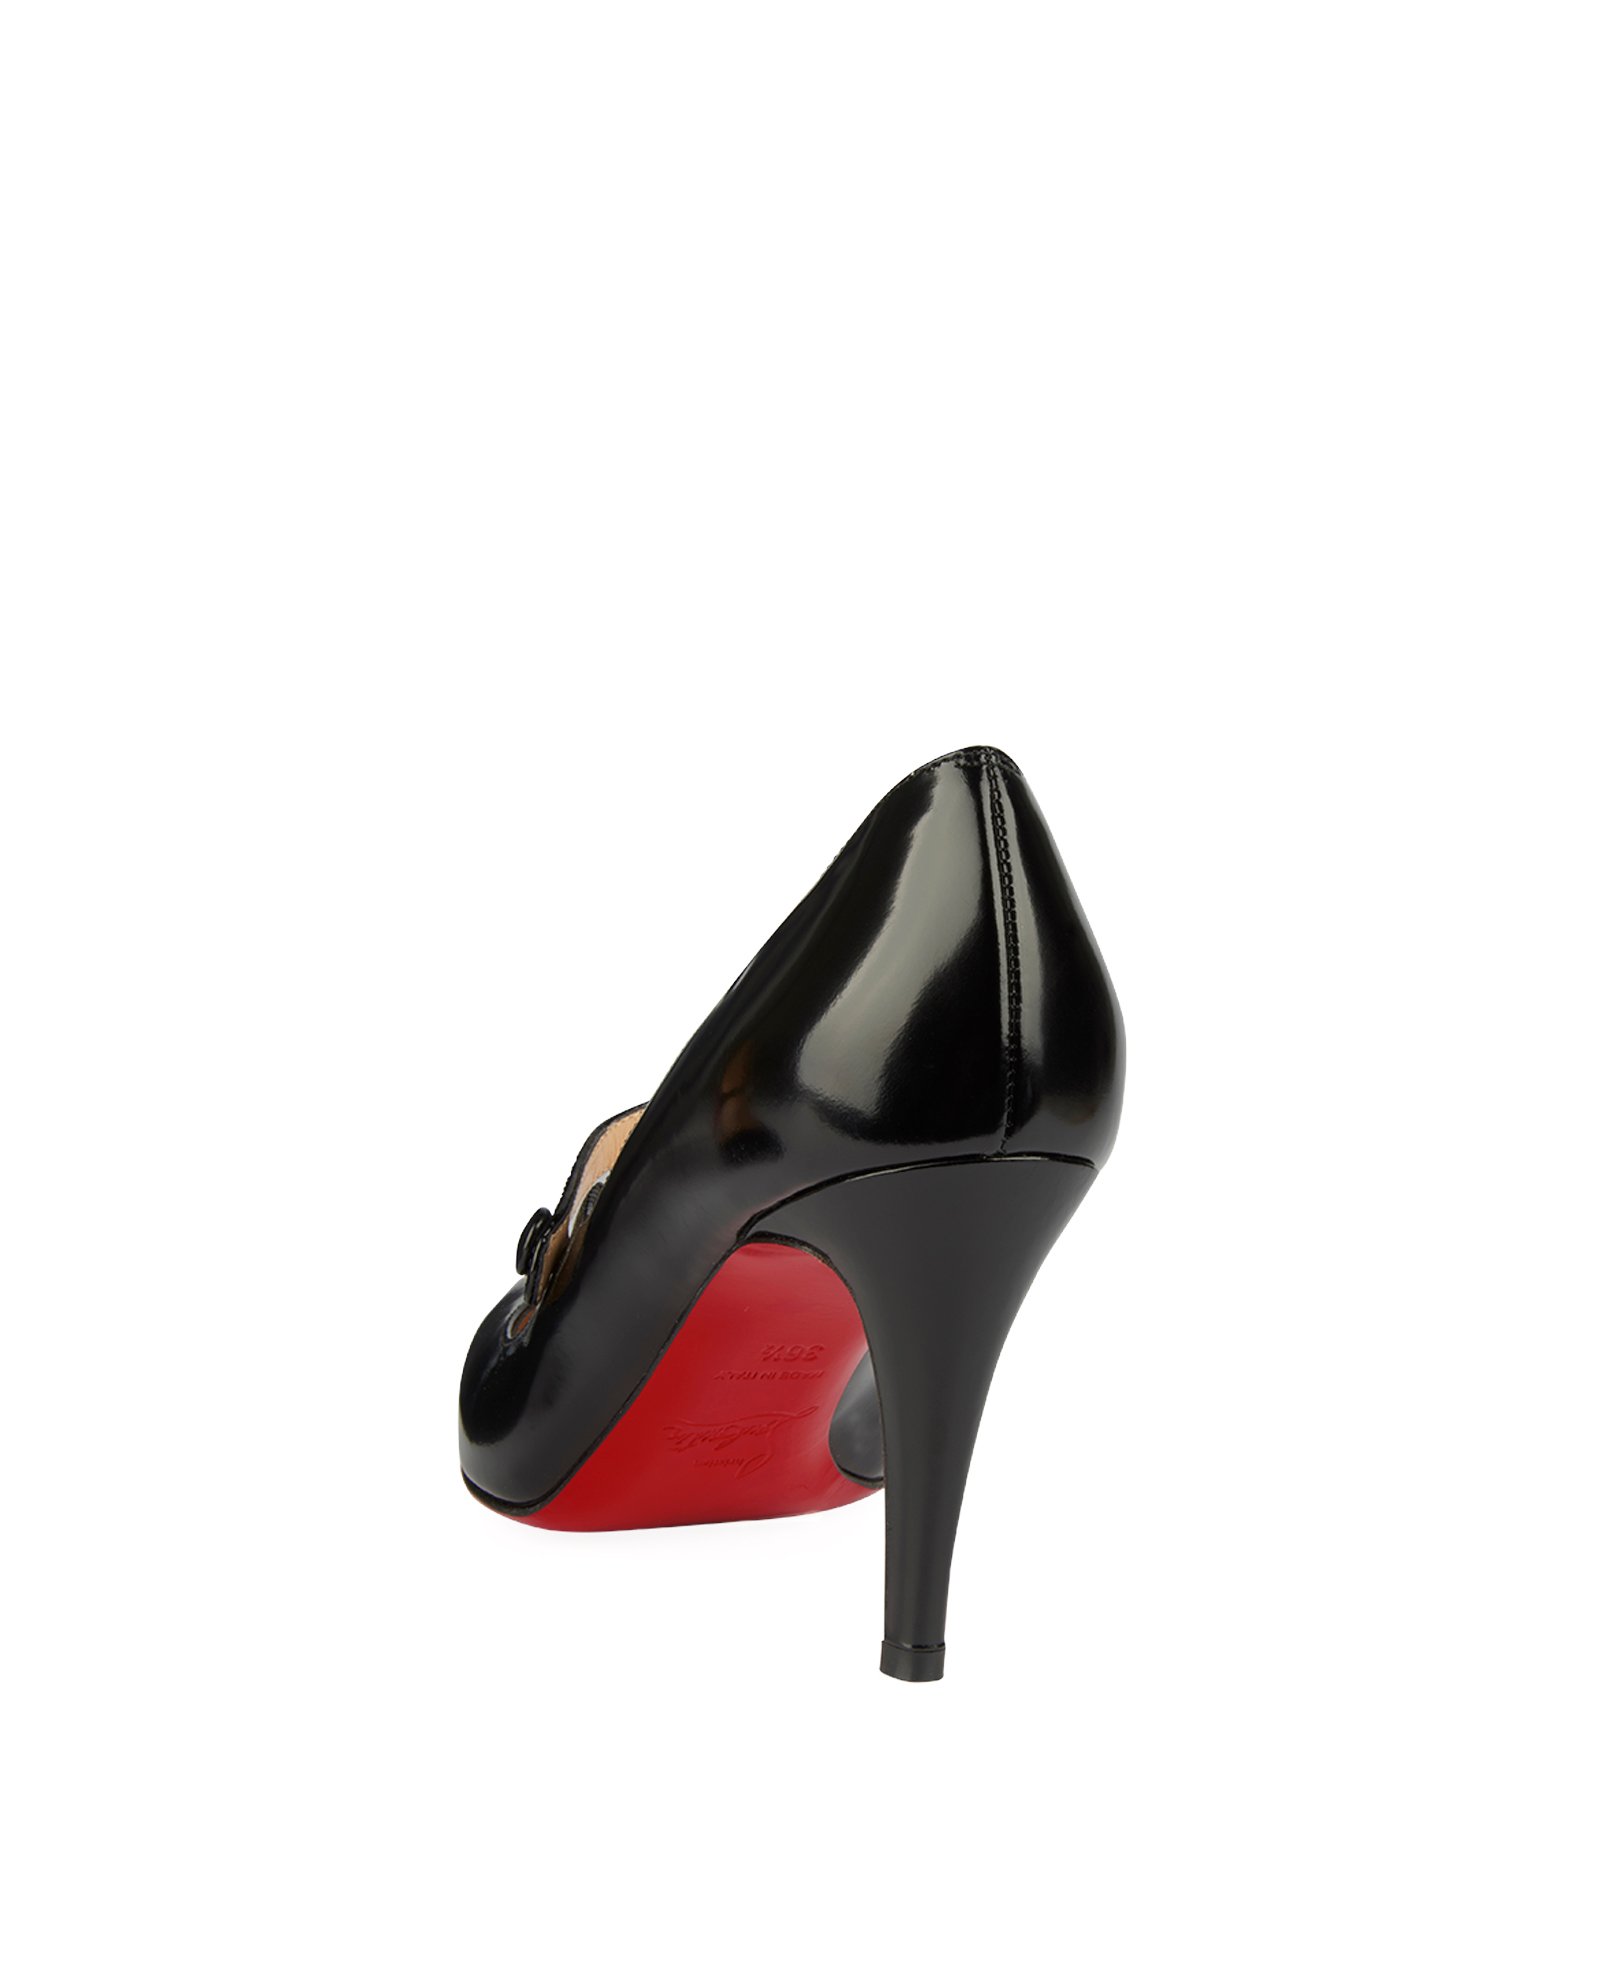 Christian Louboutin Shoes in Ashanti for sale ▷ Prices on